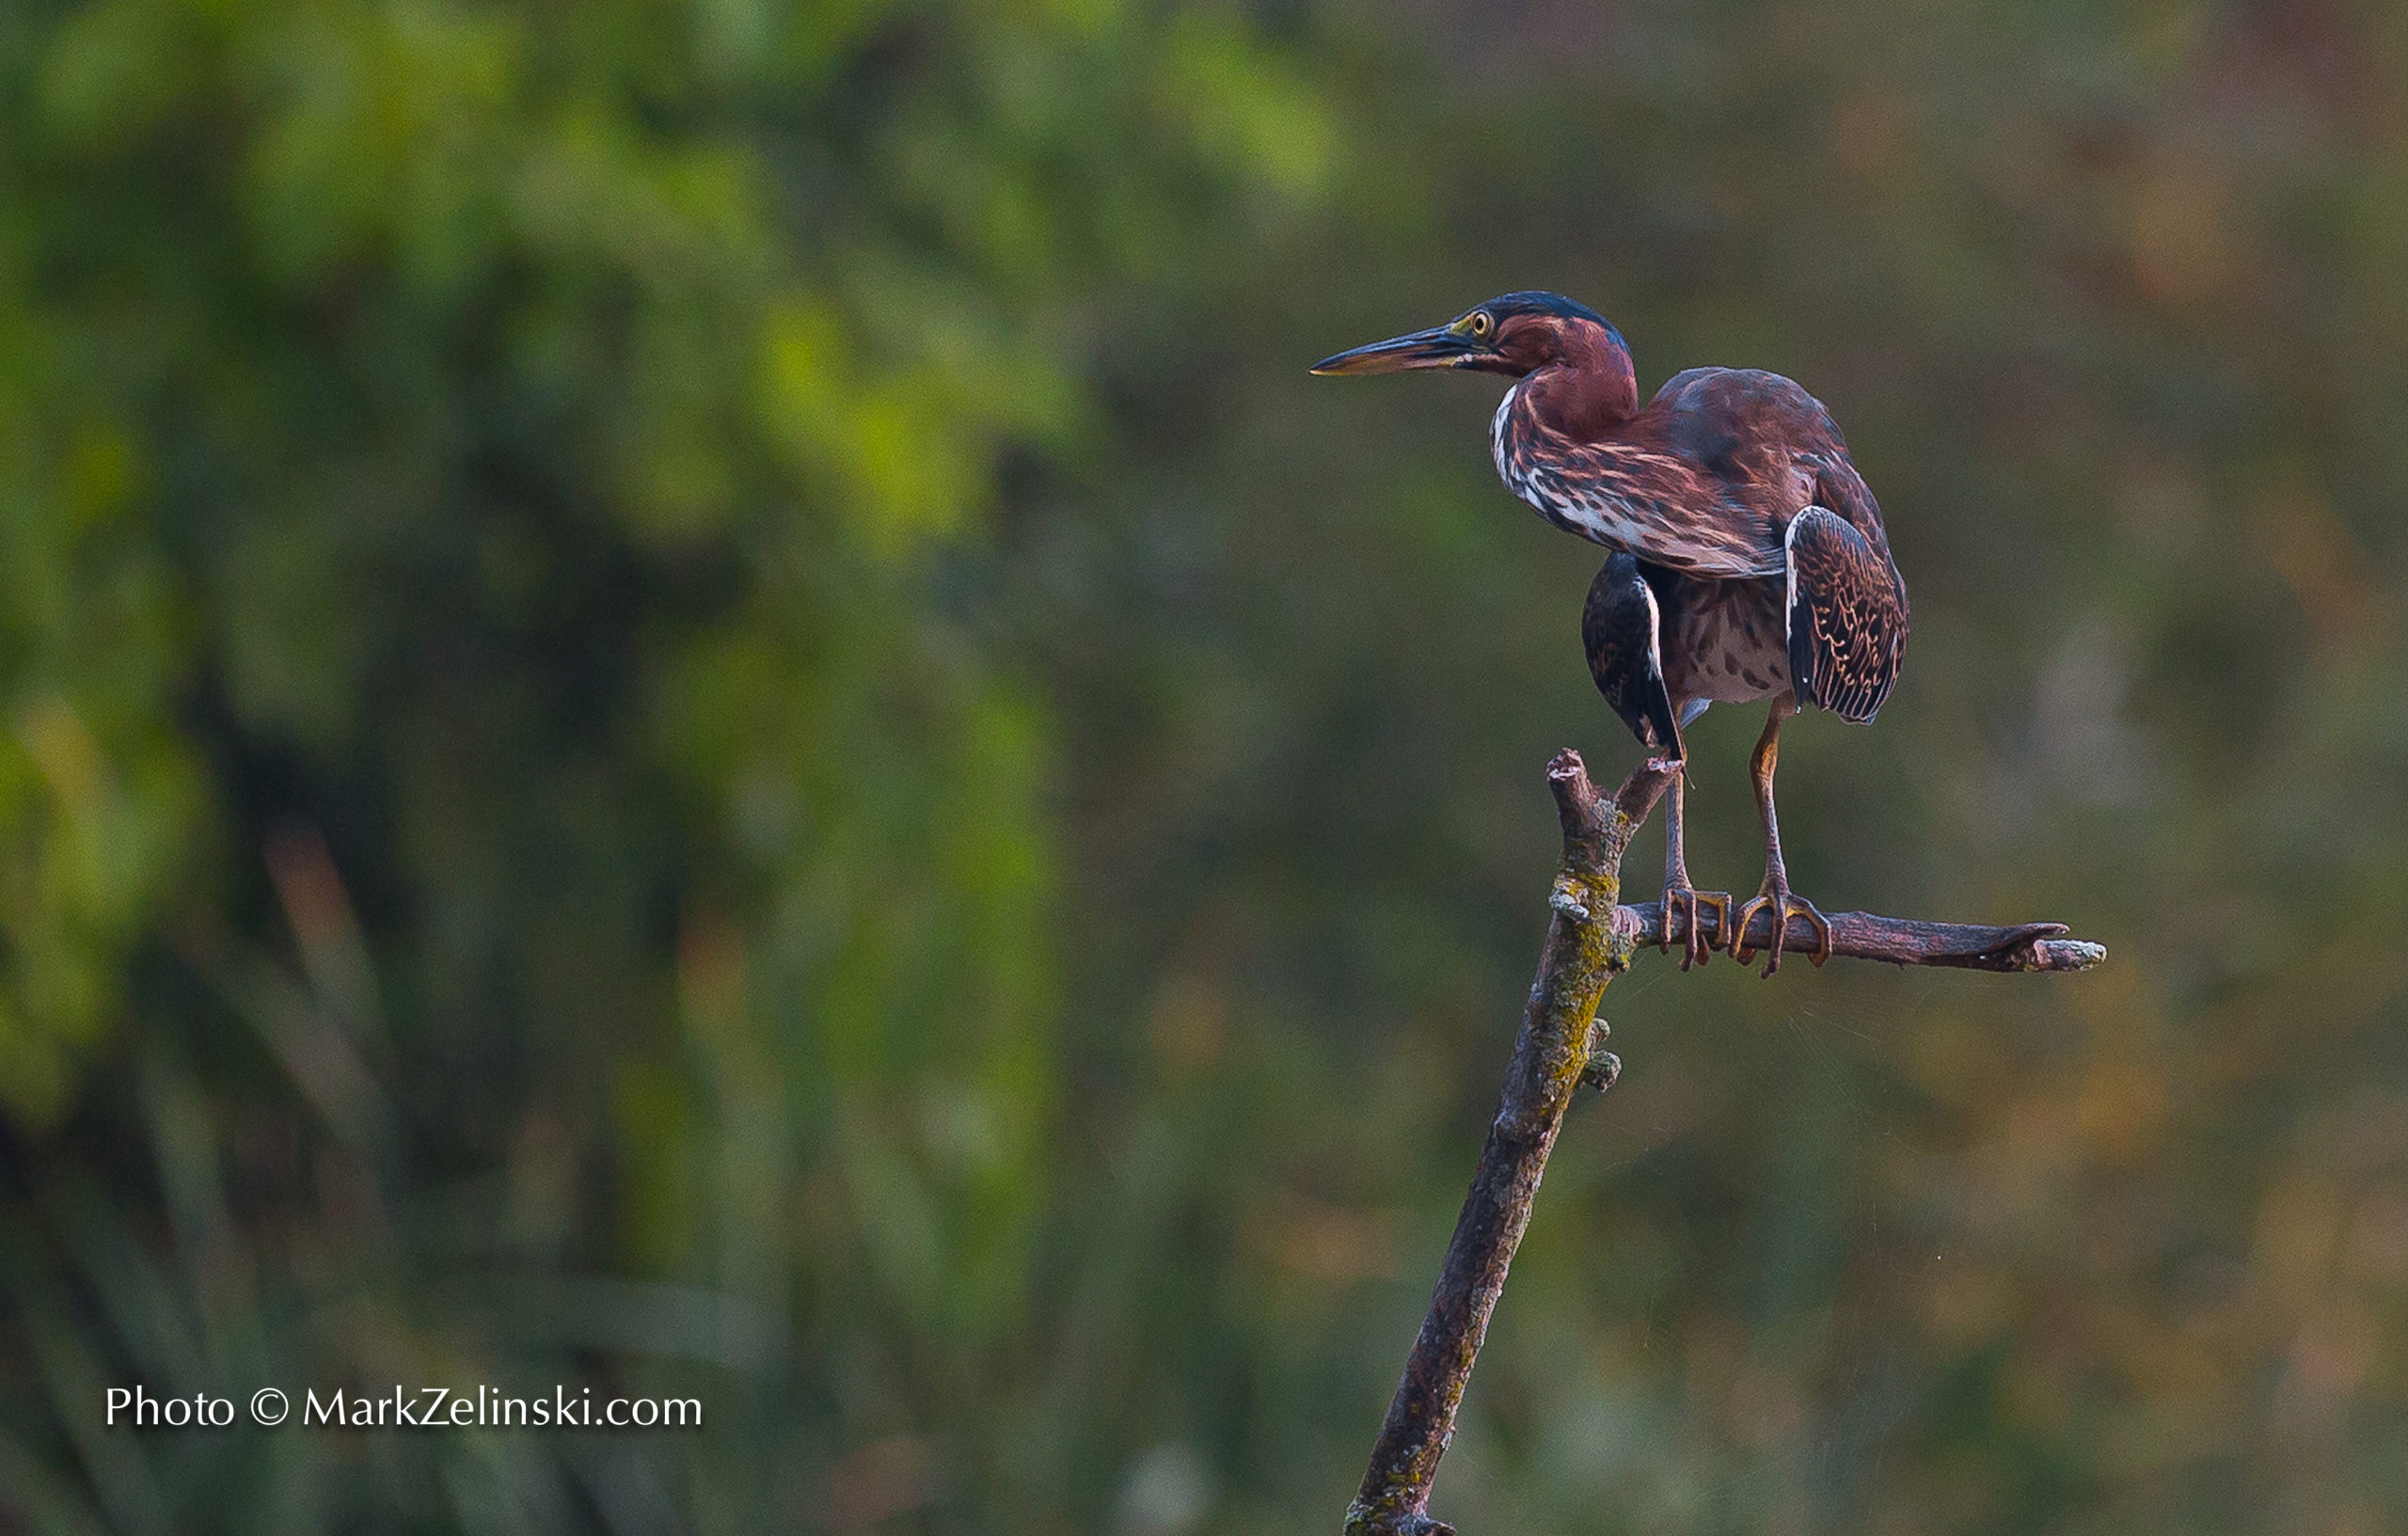 Green Heron Identification, All About Birds, Cornell Lab of Ornithology